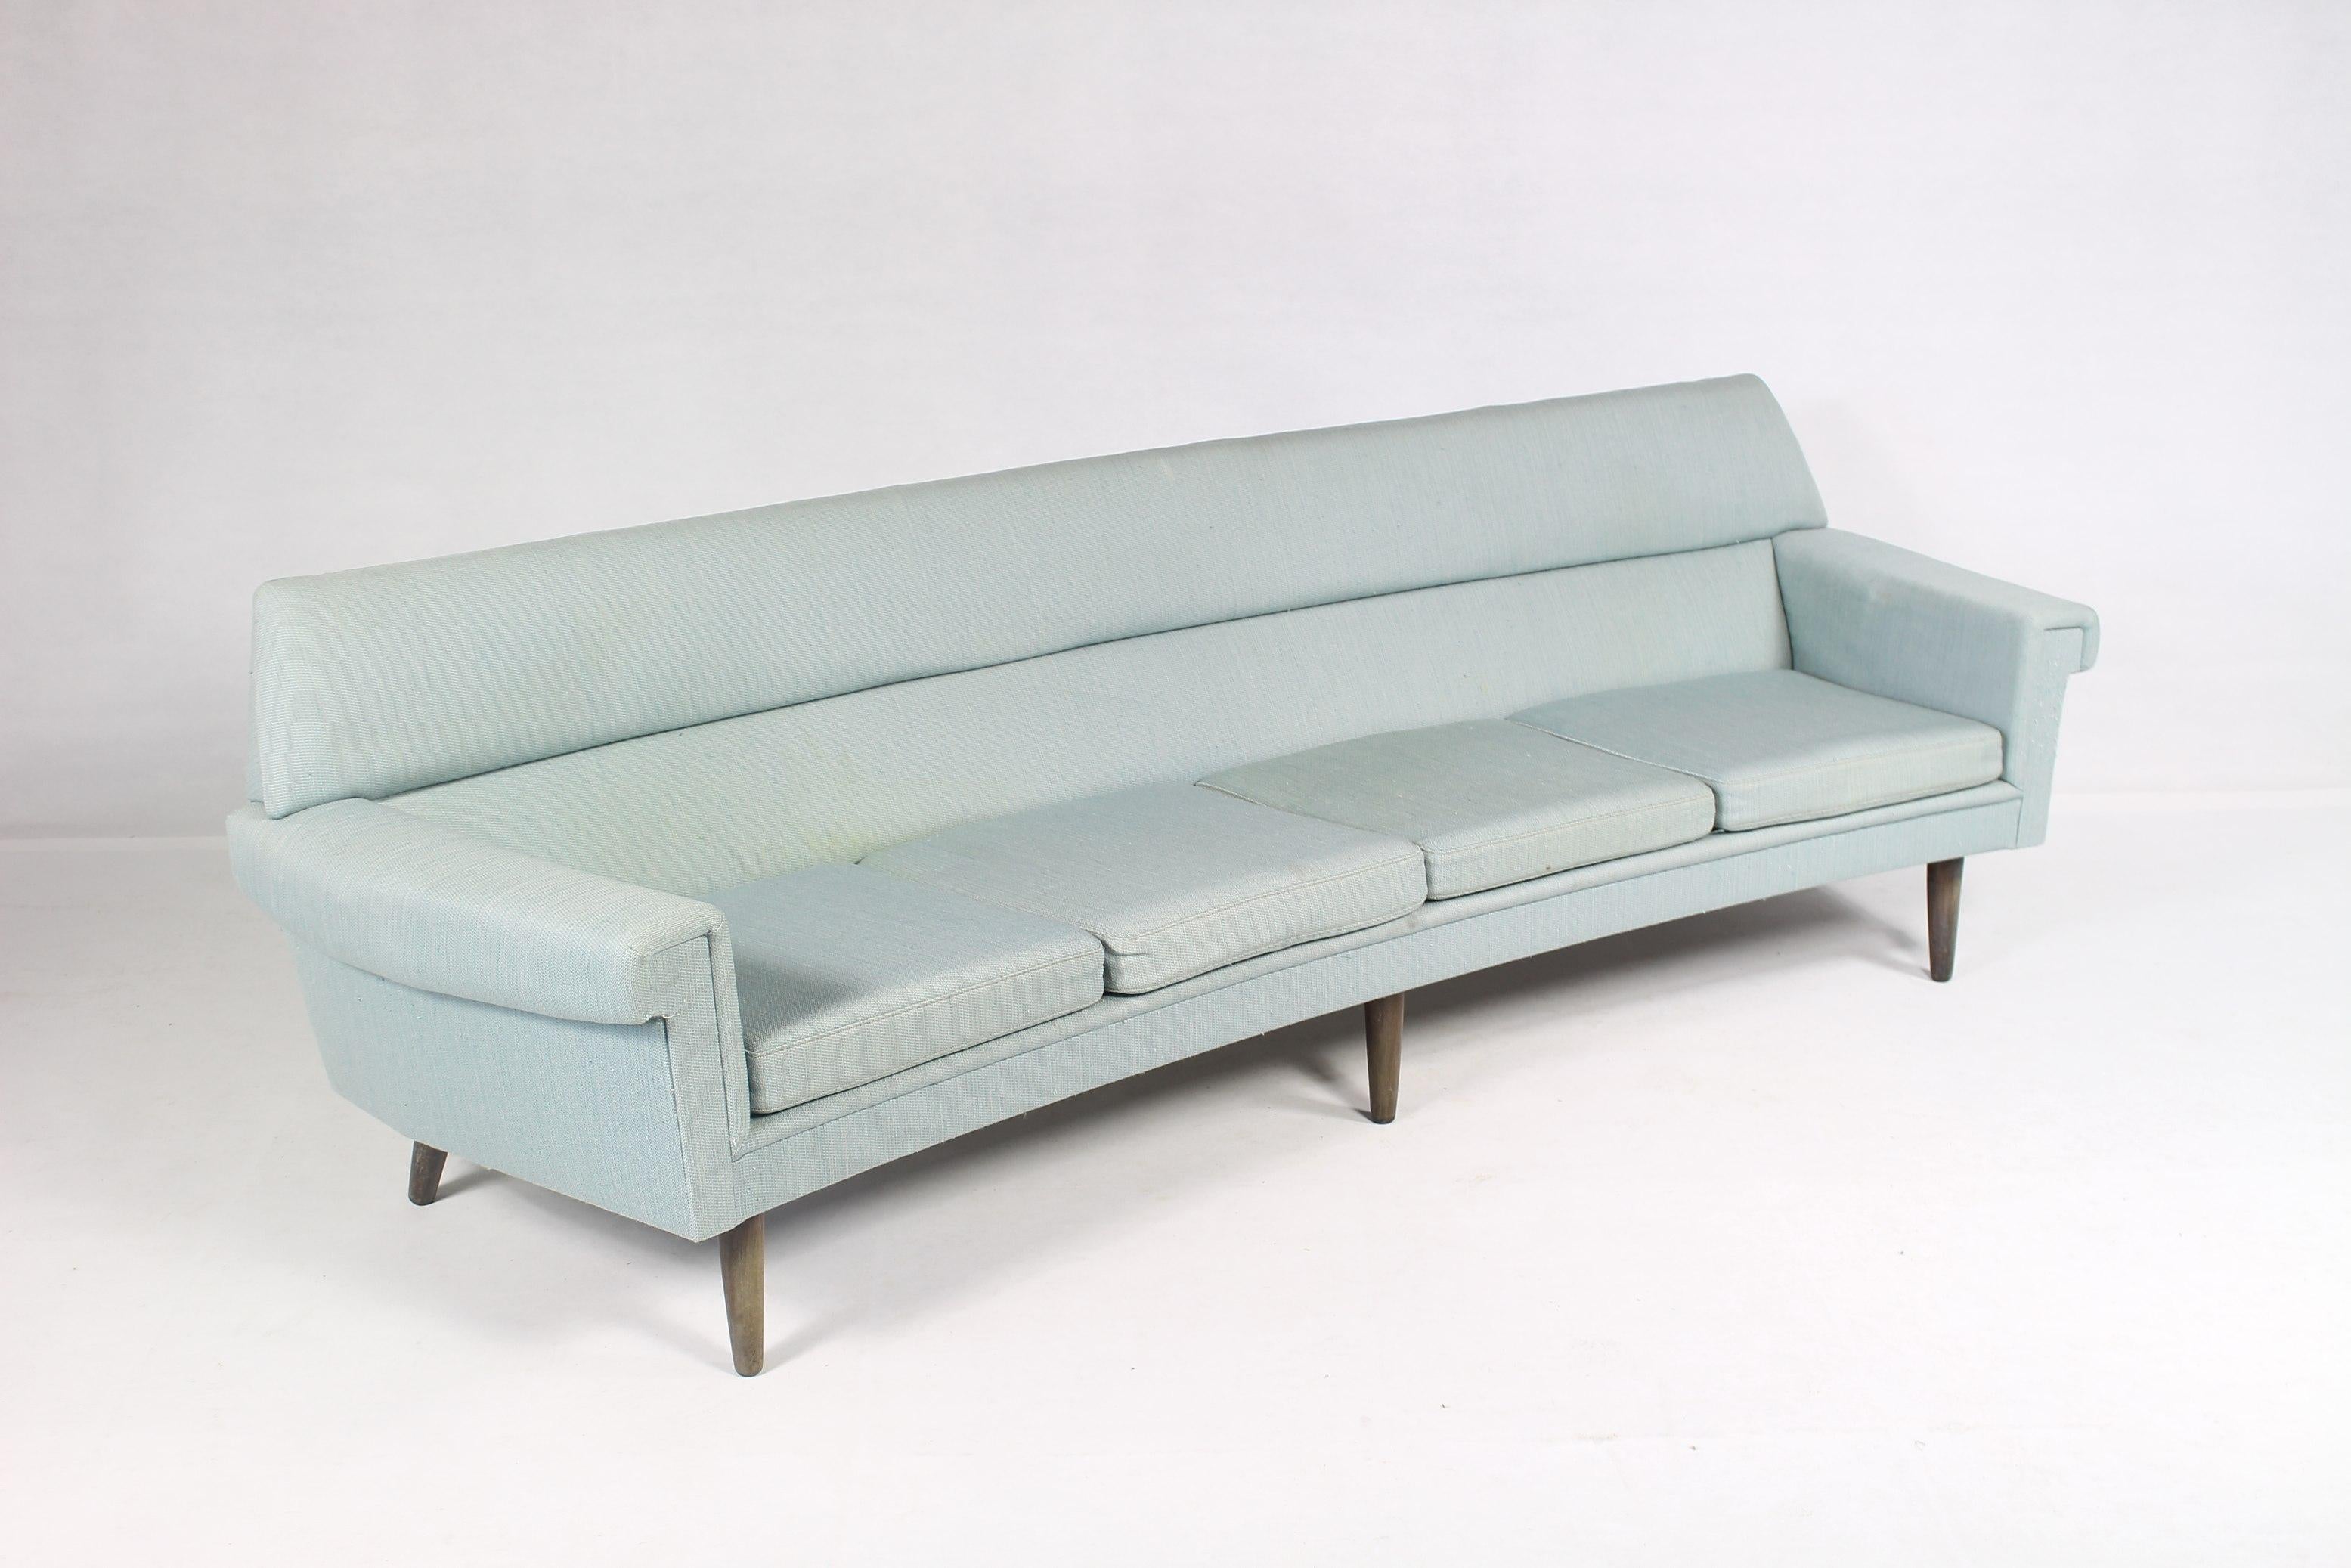 This four-seater curved sofa by Kurt Østervig.
Made in Denmark, 1960s.
Upholstered with the original wool in light blue.
It is recommended to replace the upholstery.